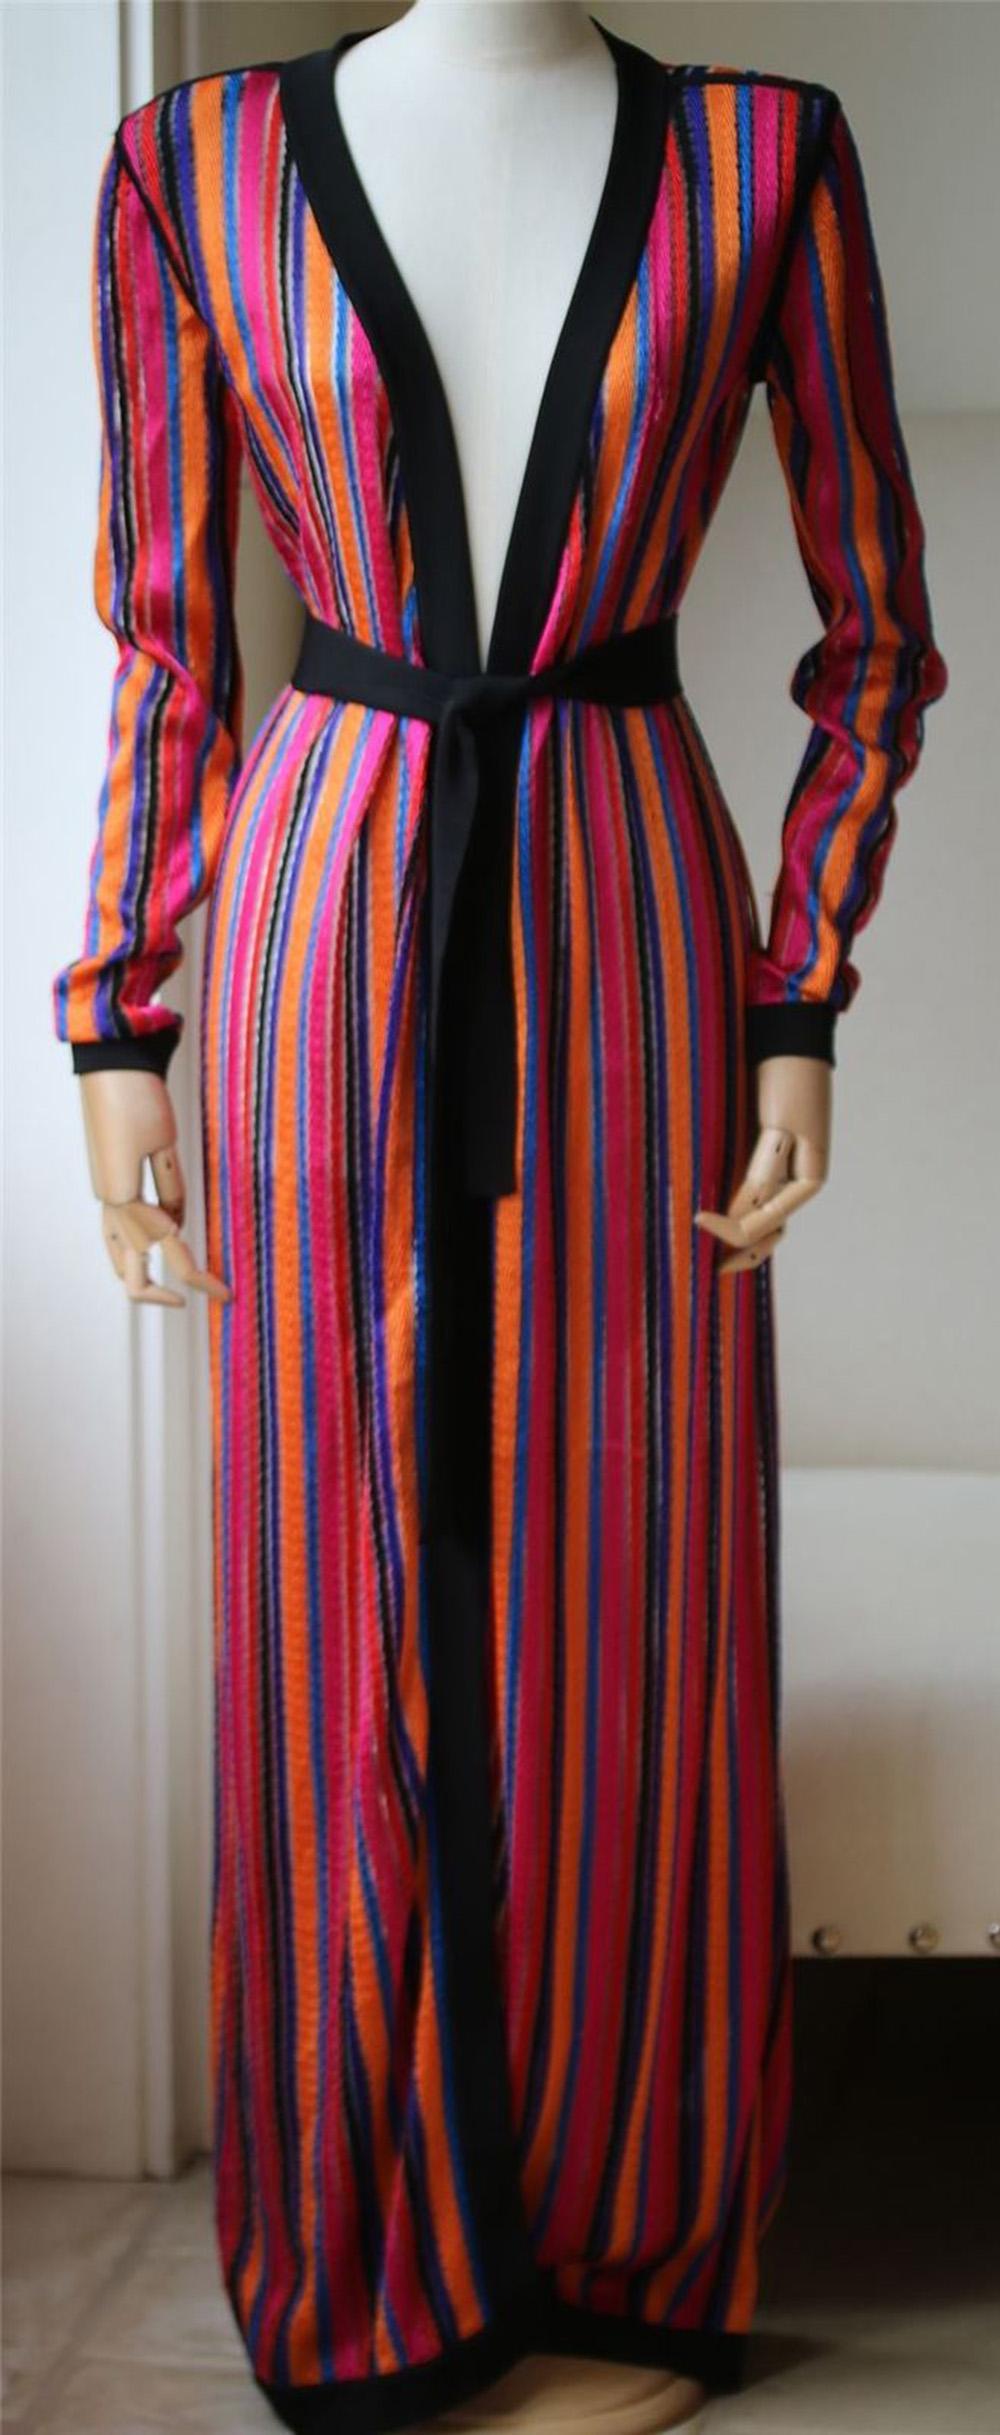 Balmain's cardigan is an elegant choice for slipping over a bikini or wearing as a jacket on cool summer evenings. This open-knit design has a floor-length silhouette and is striped in kaleidoscopic hues - Creative Director Olivier Rousteing is